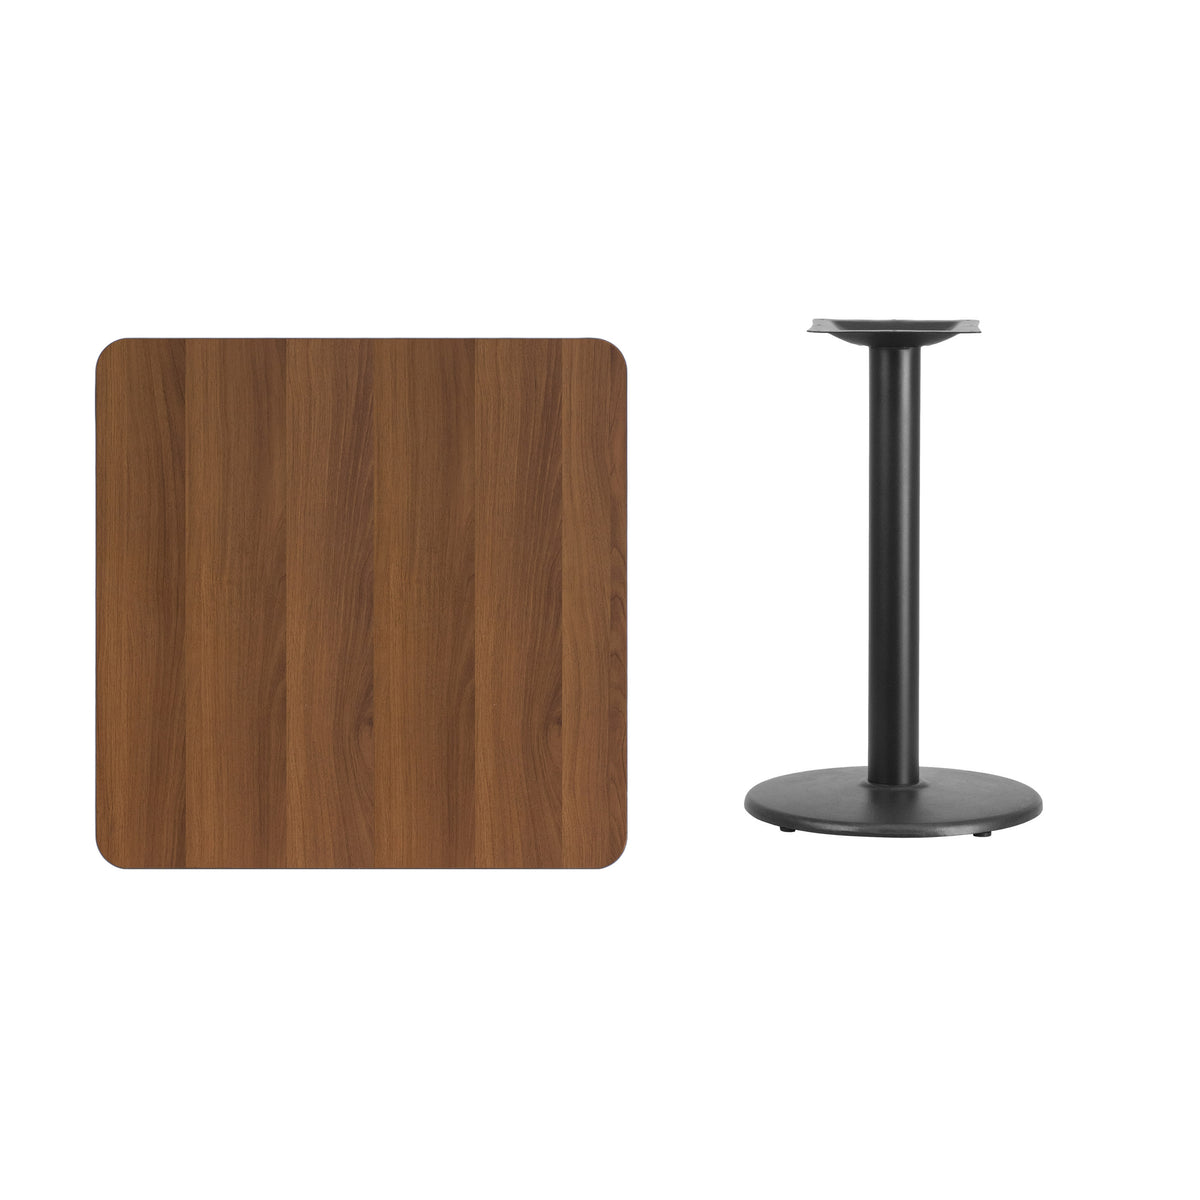 Walnut |#| 30inch Square Walnut Laminate Table Top with 18inch Round Table Height Base